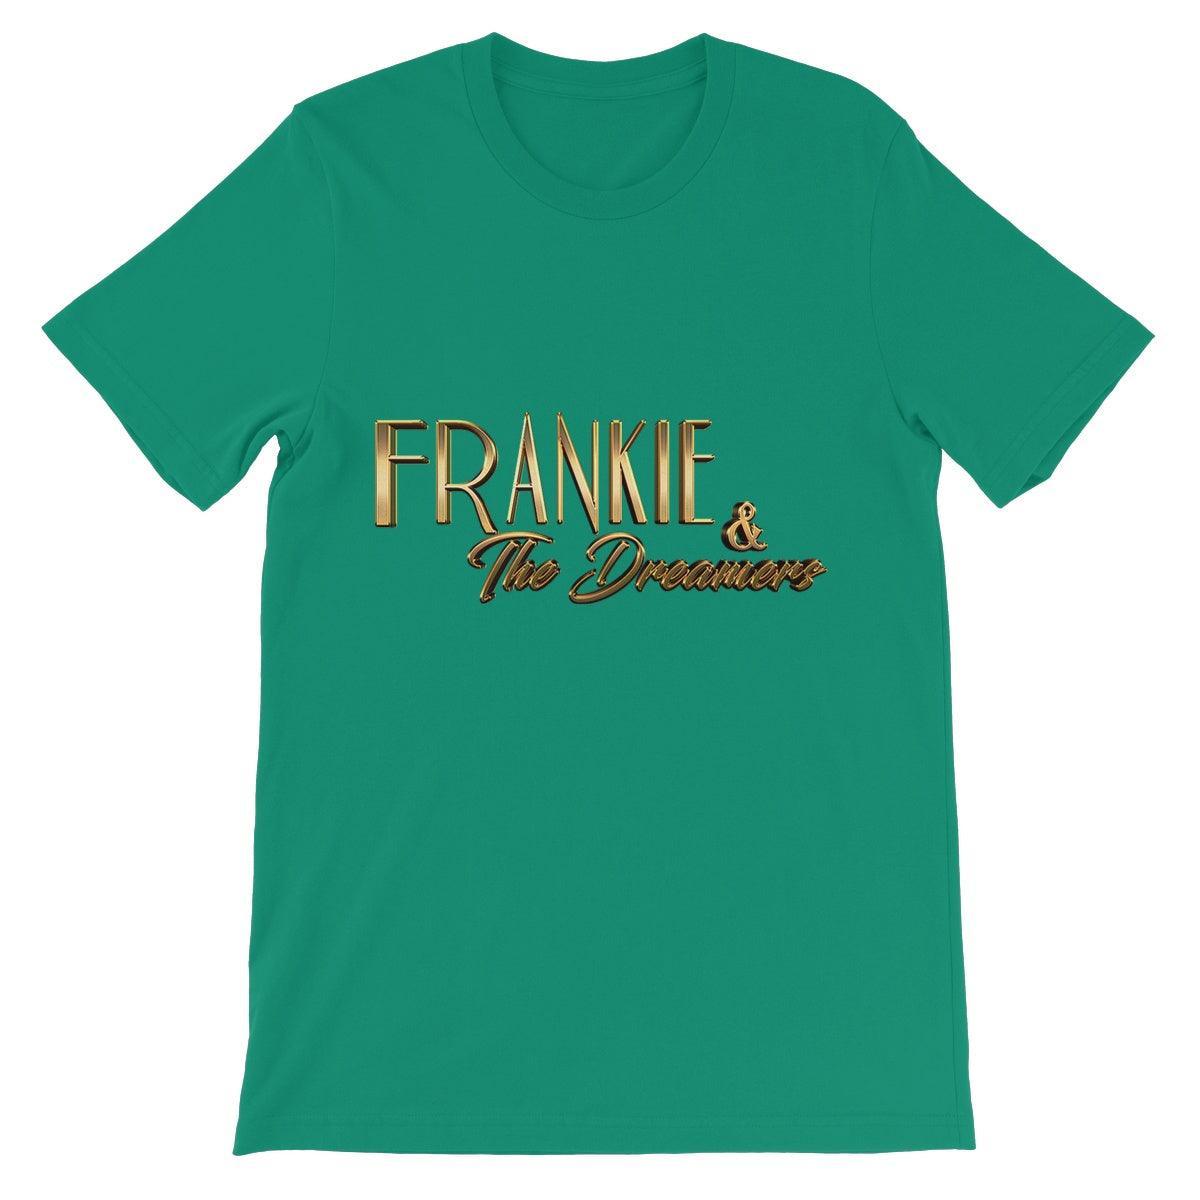 Frankie And The Dreamers Unisex Short Sleeve T-Shirt | Apparel Kelly